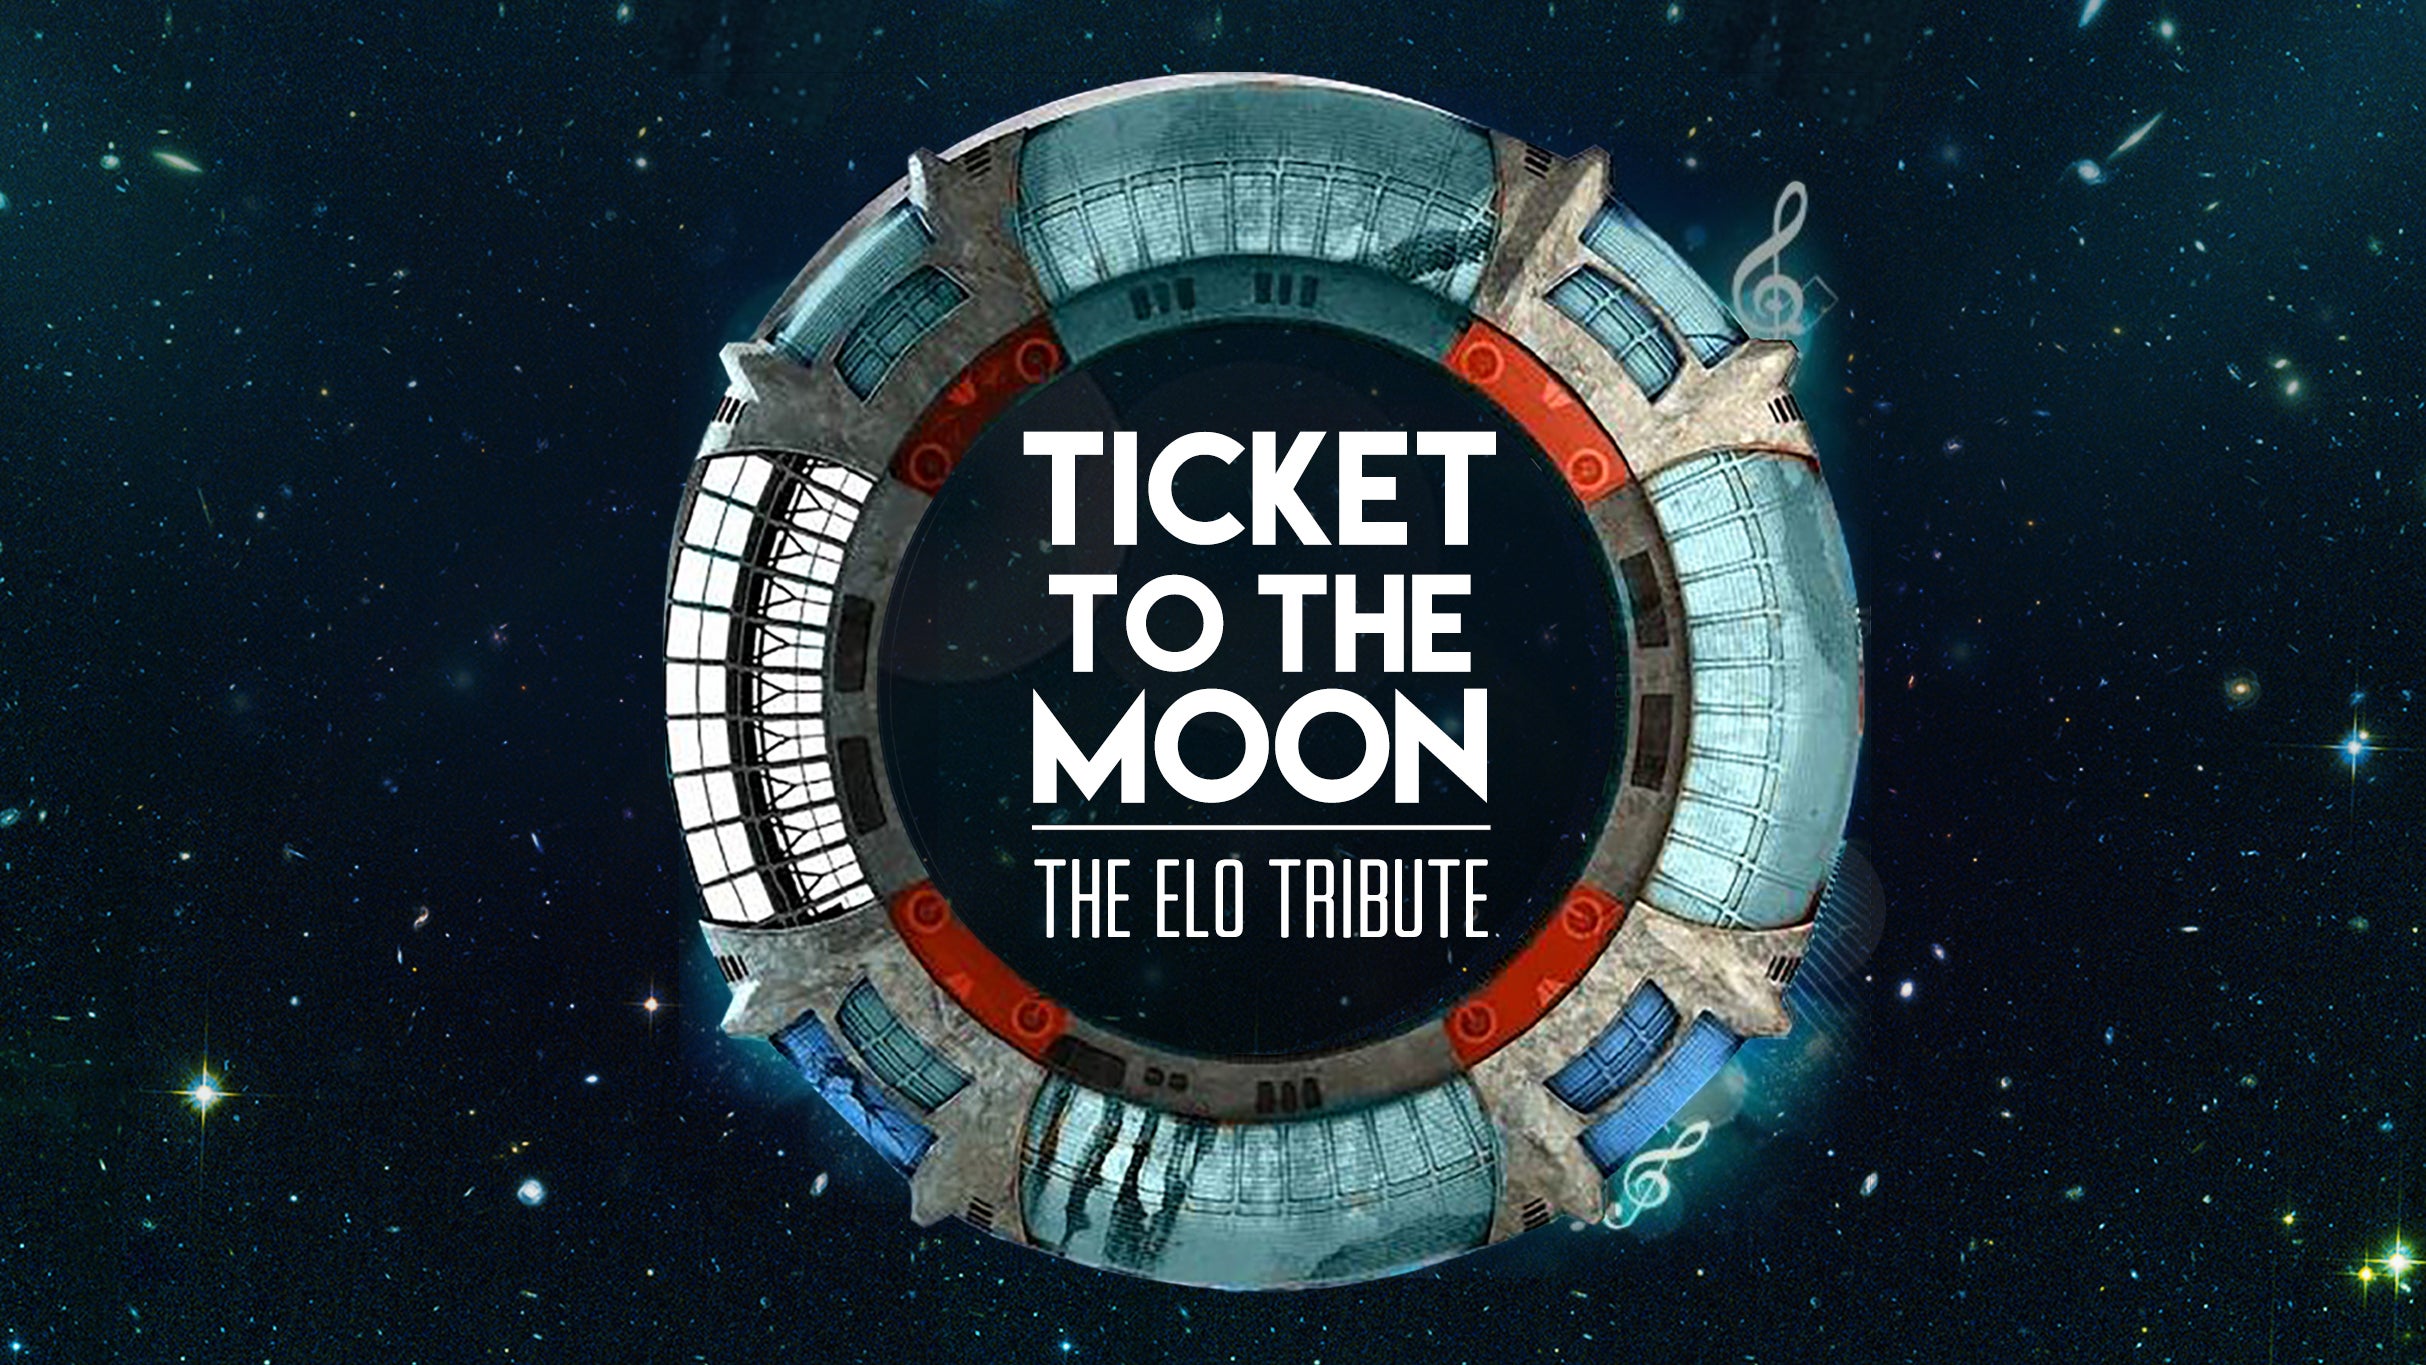 Ticket To The Moon - The Electric Light Orchestra Tribute free presale password